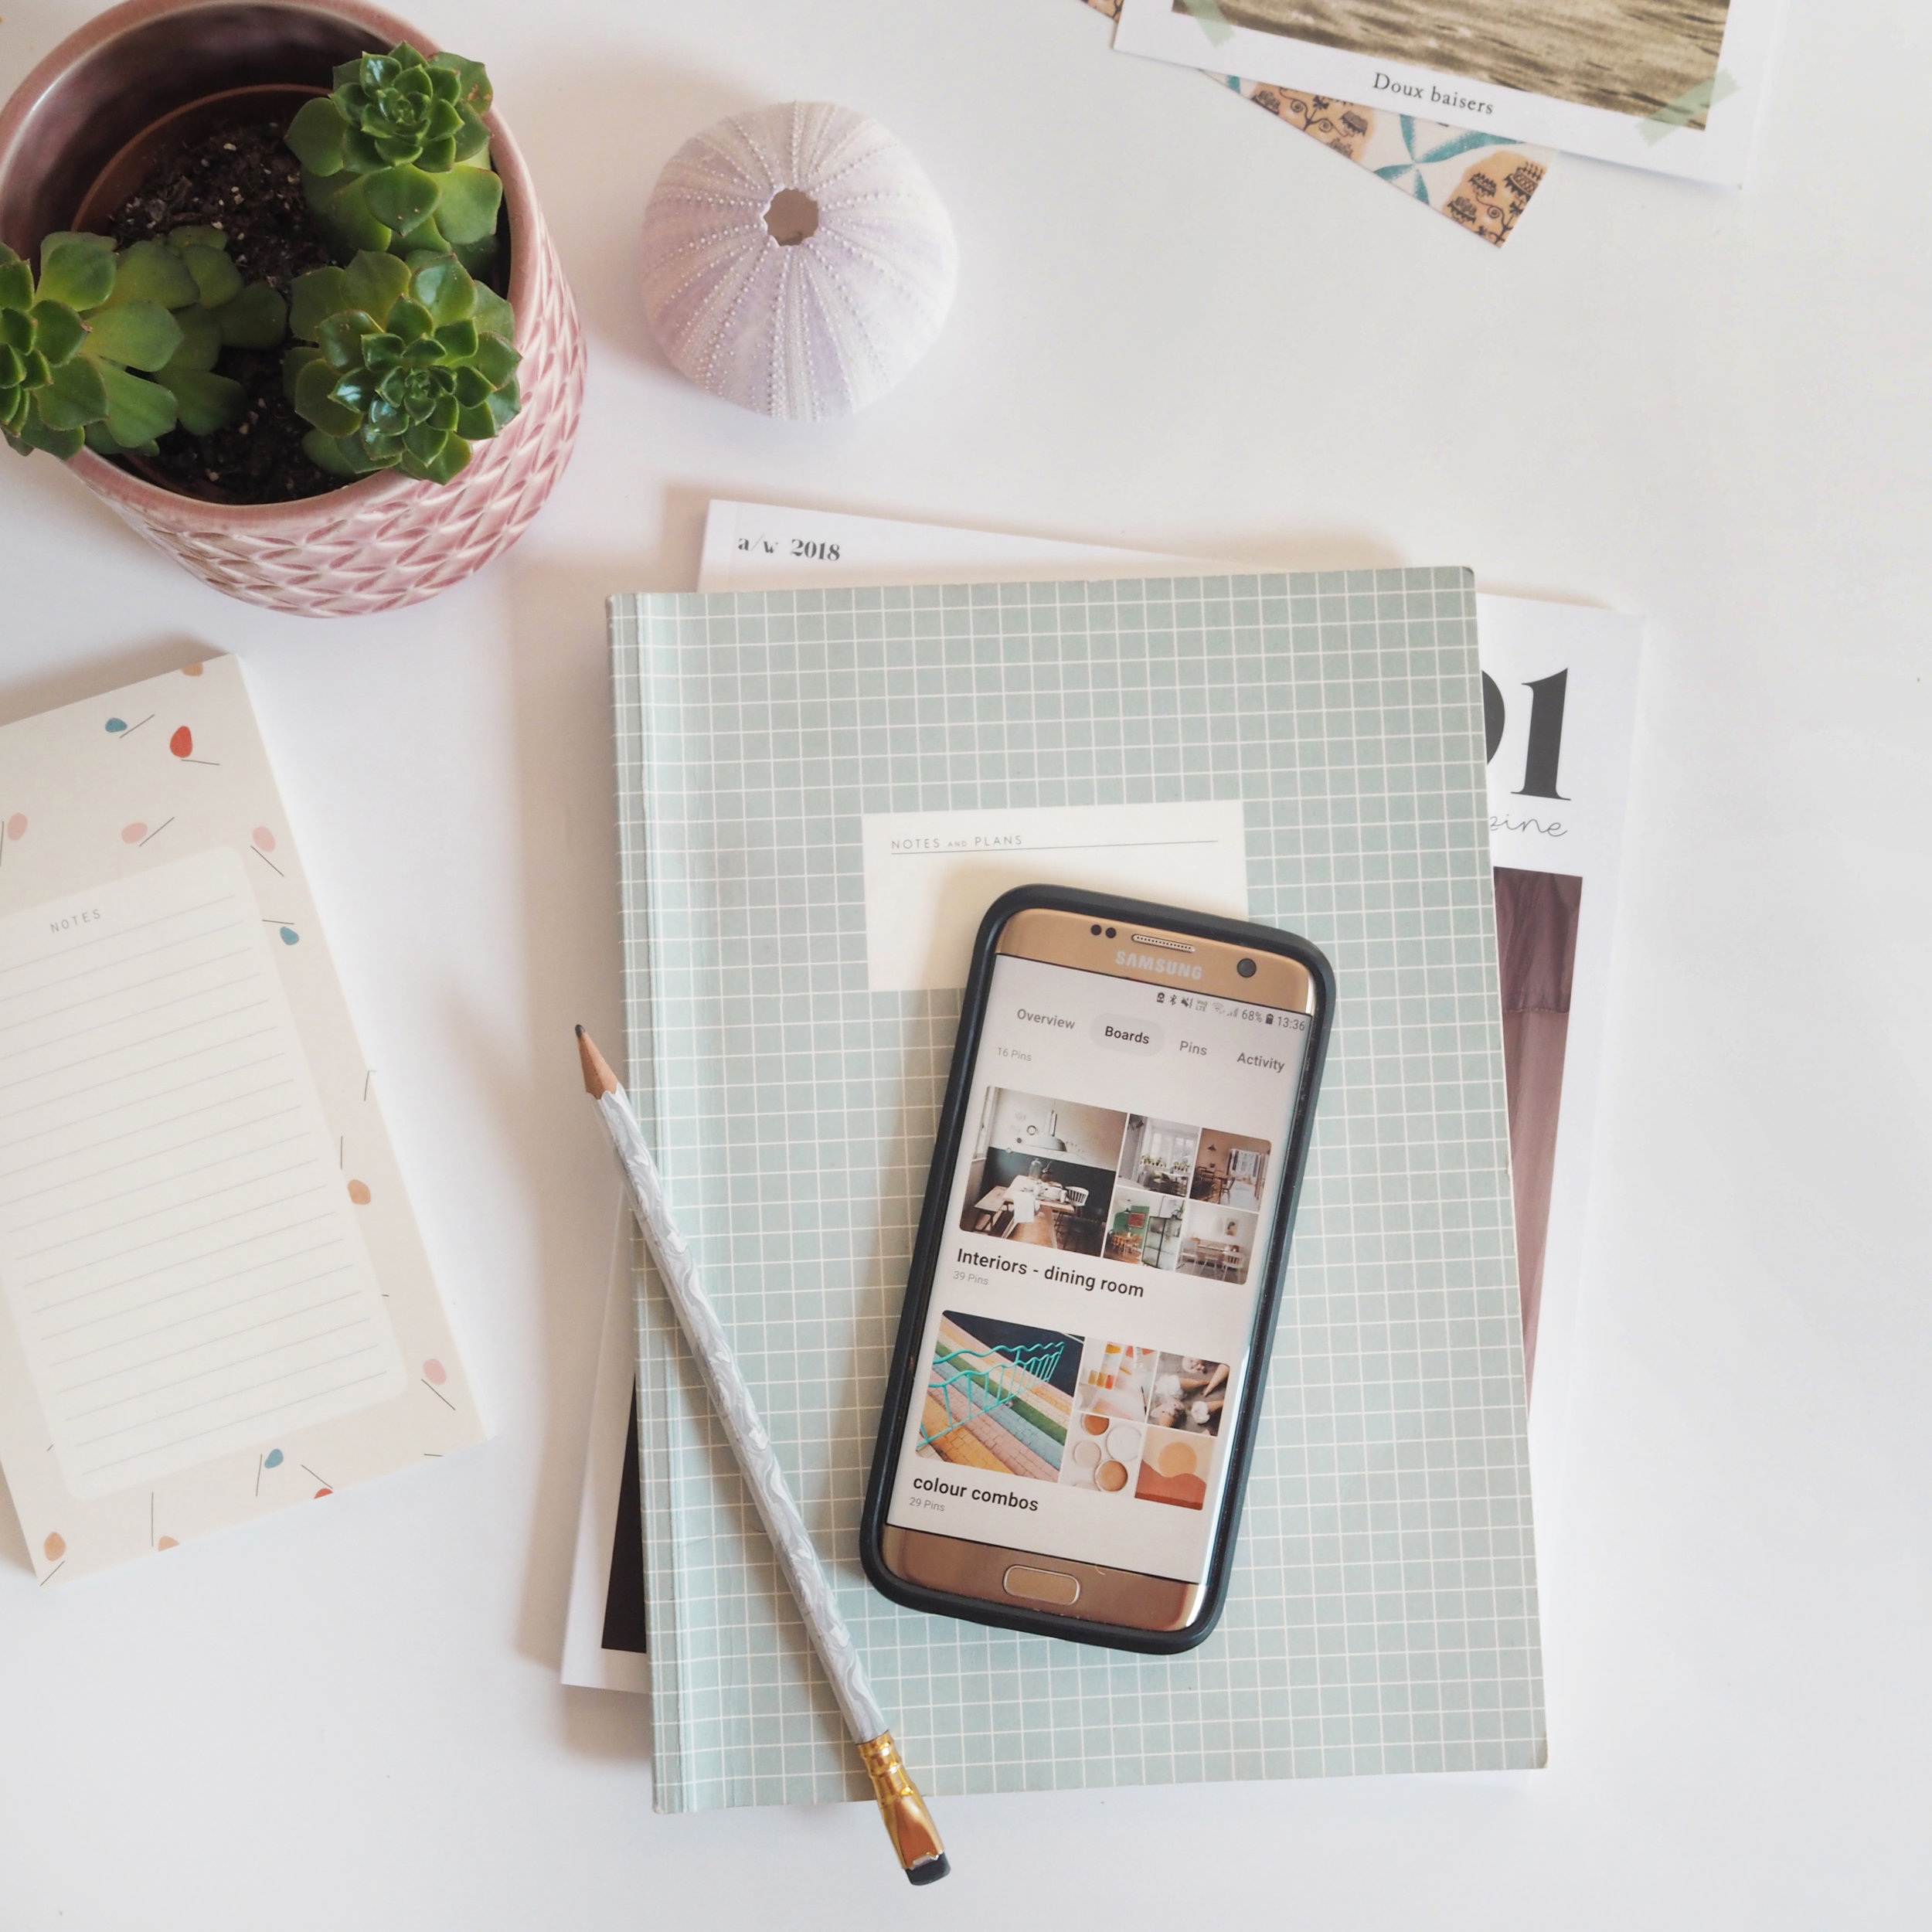 5 tips for using Pinterest to promote your small business